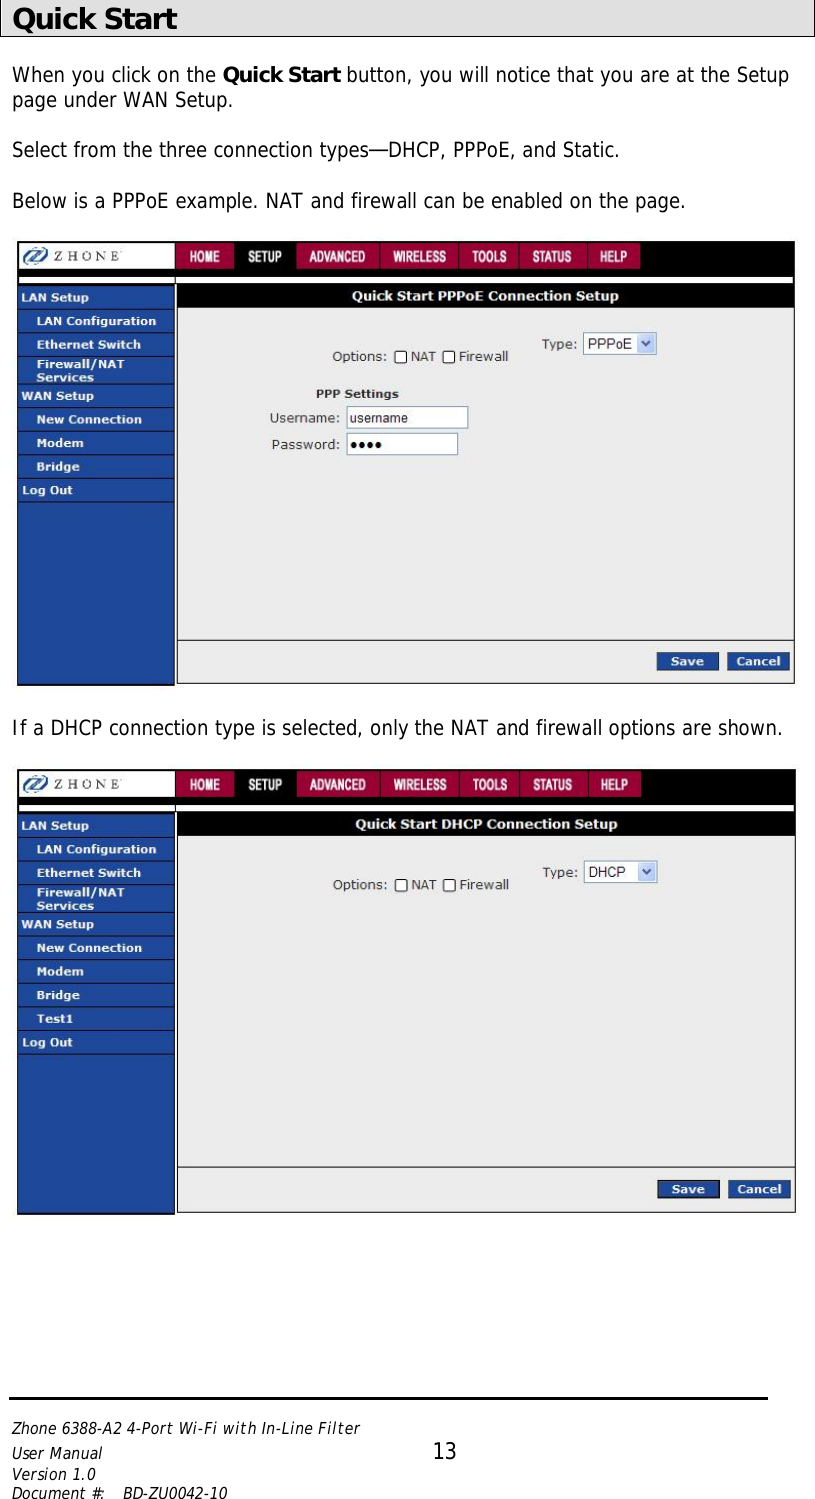   Zhone 6388-A2 4-Port Wi-Fi with In-Line Filter User Manual 13 Version 1.0 Document #:  BD-ZU0042-10    Quick Start  When you click on the Quick Start button, you will notice that you are at the Setup page under WAN Setup.   Select from the three connection types—DHCP, PPPoE, and Static.  Below is a PPPoE example. NAT and firewall can be enabled on the page.     If a DHCP connection type is selected, only the NAT and firewall options are shown.   